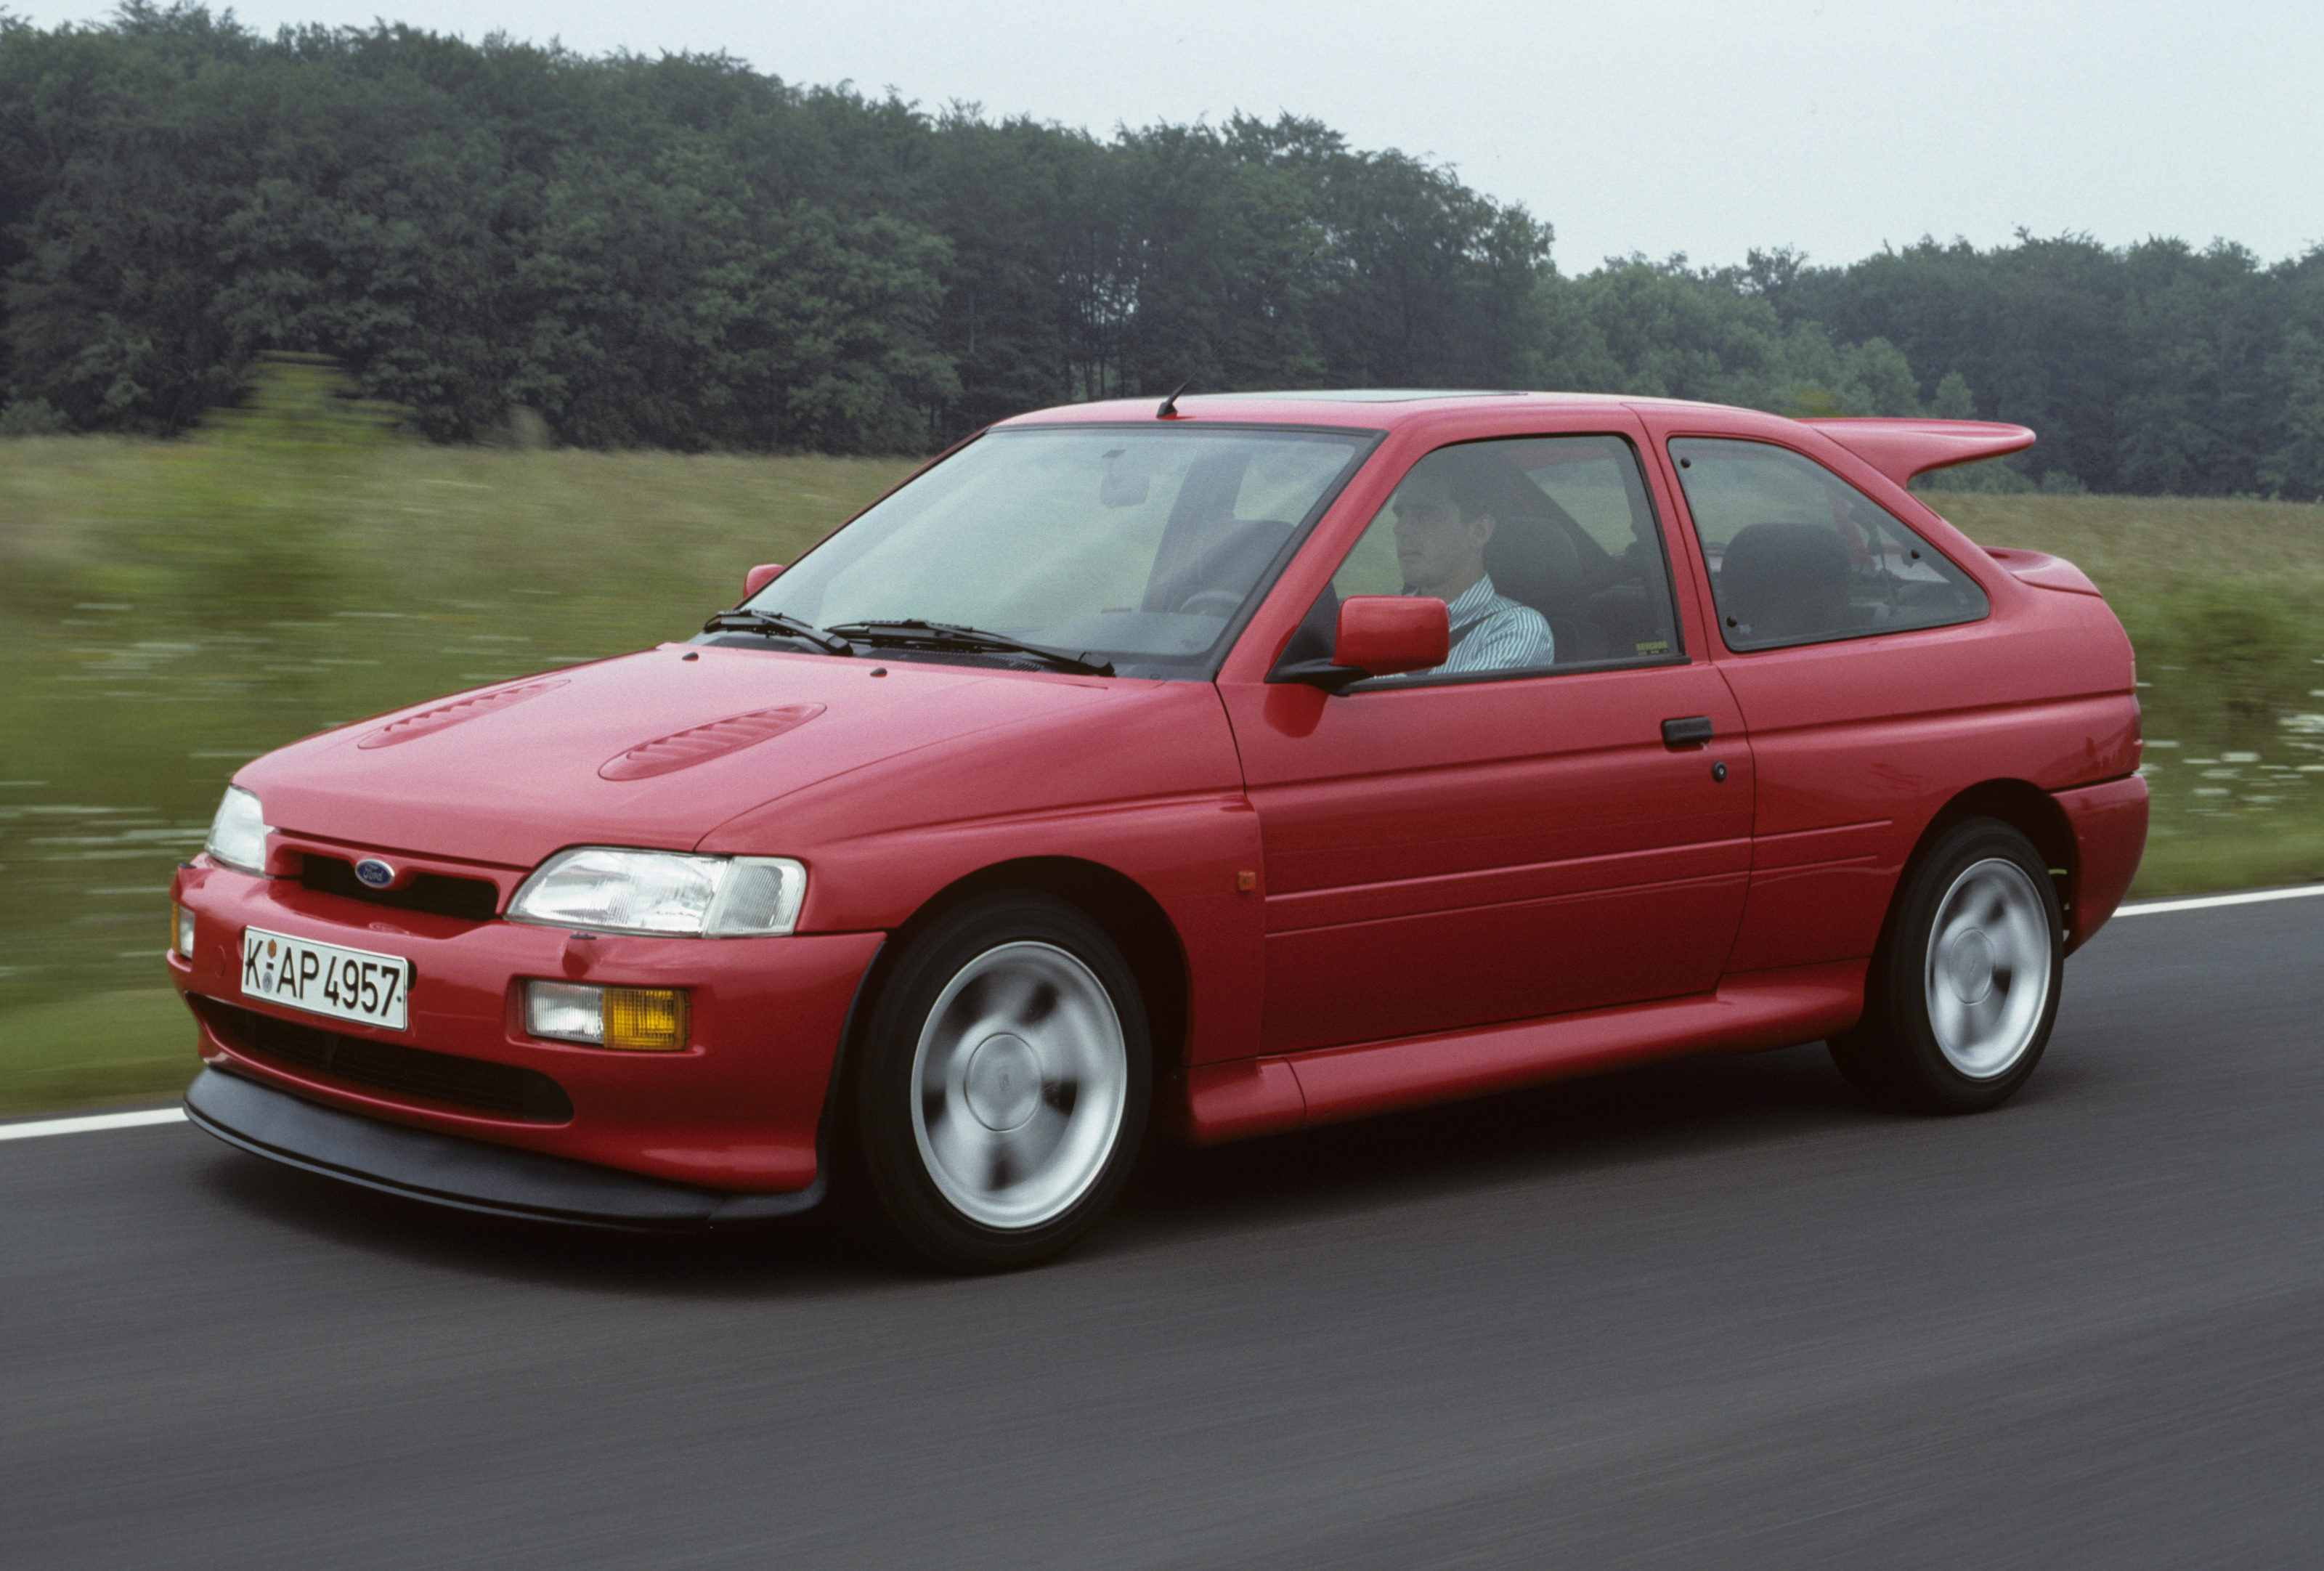 The Escort Cosworth could give most supercars a run for their money